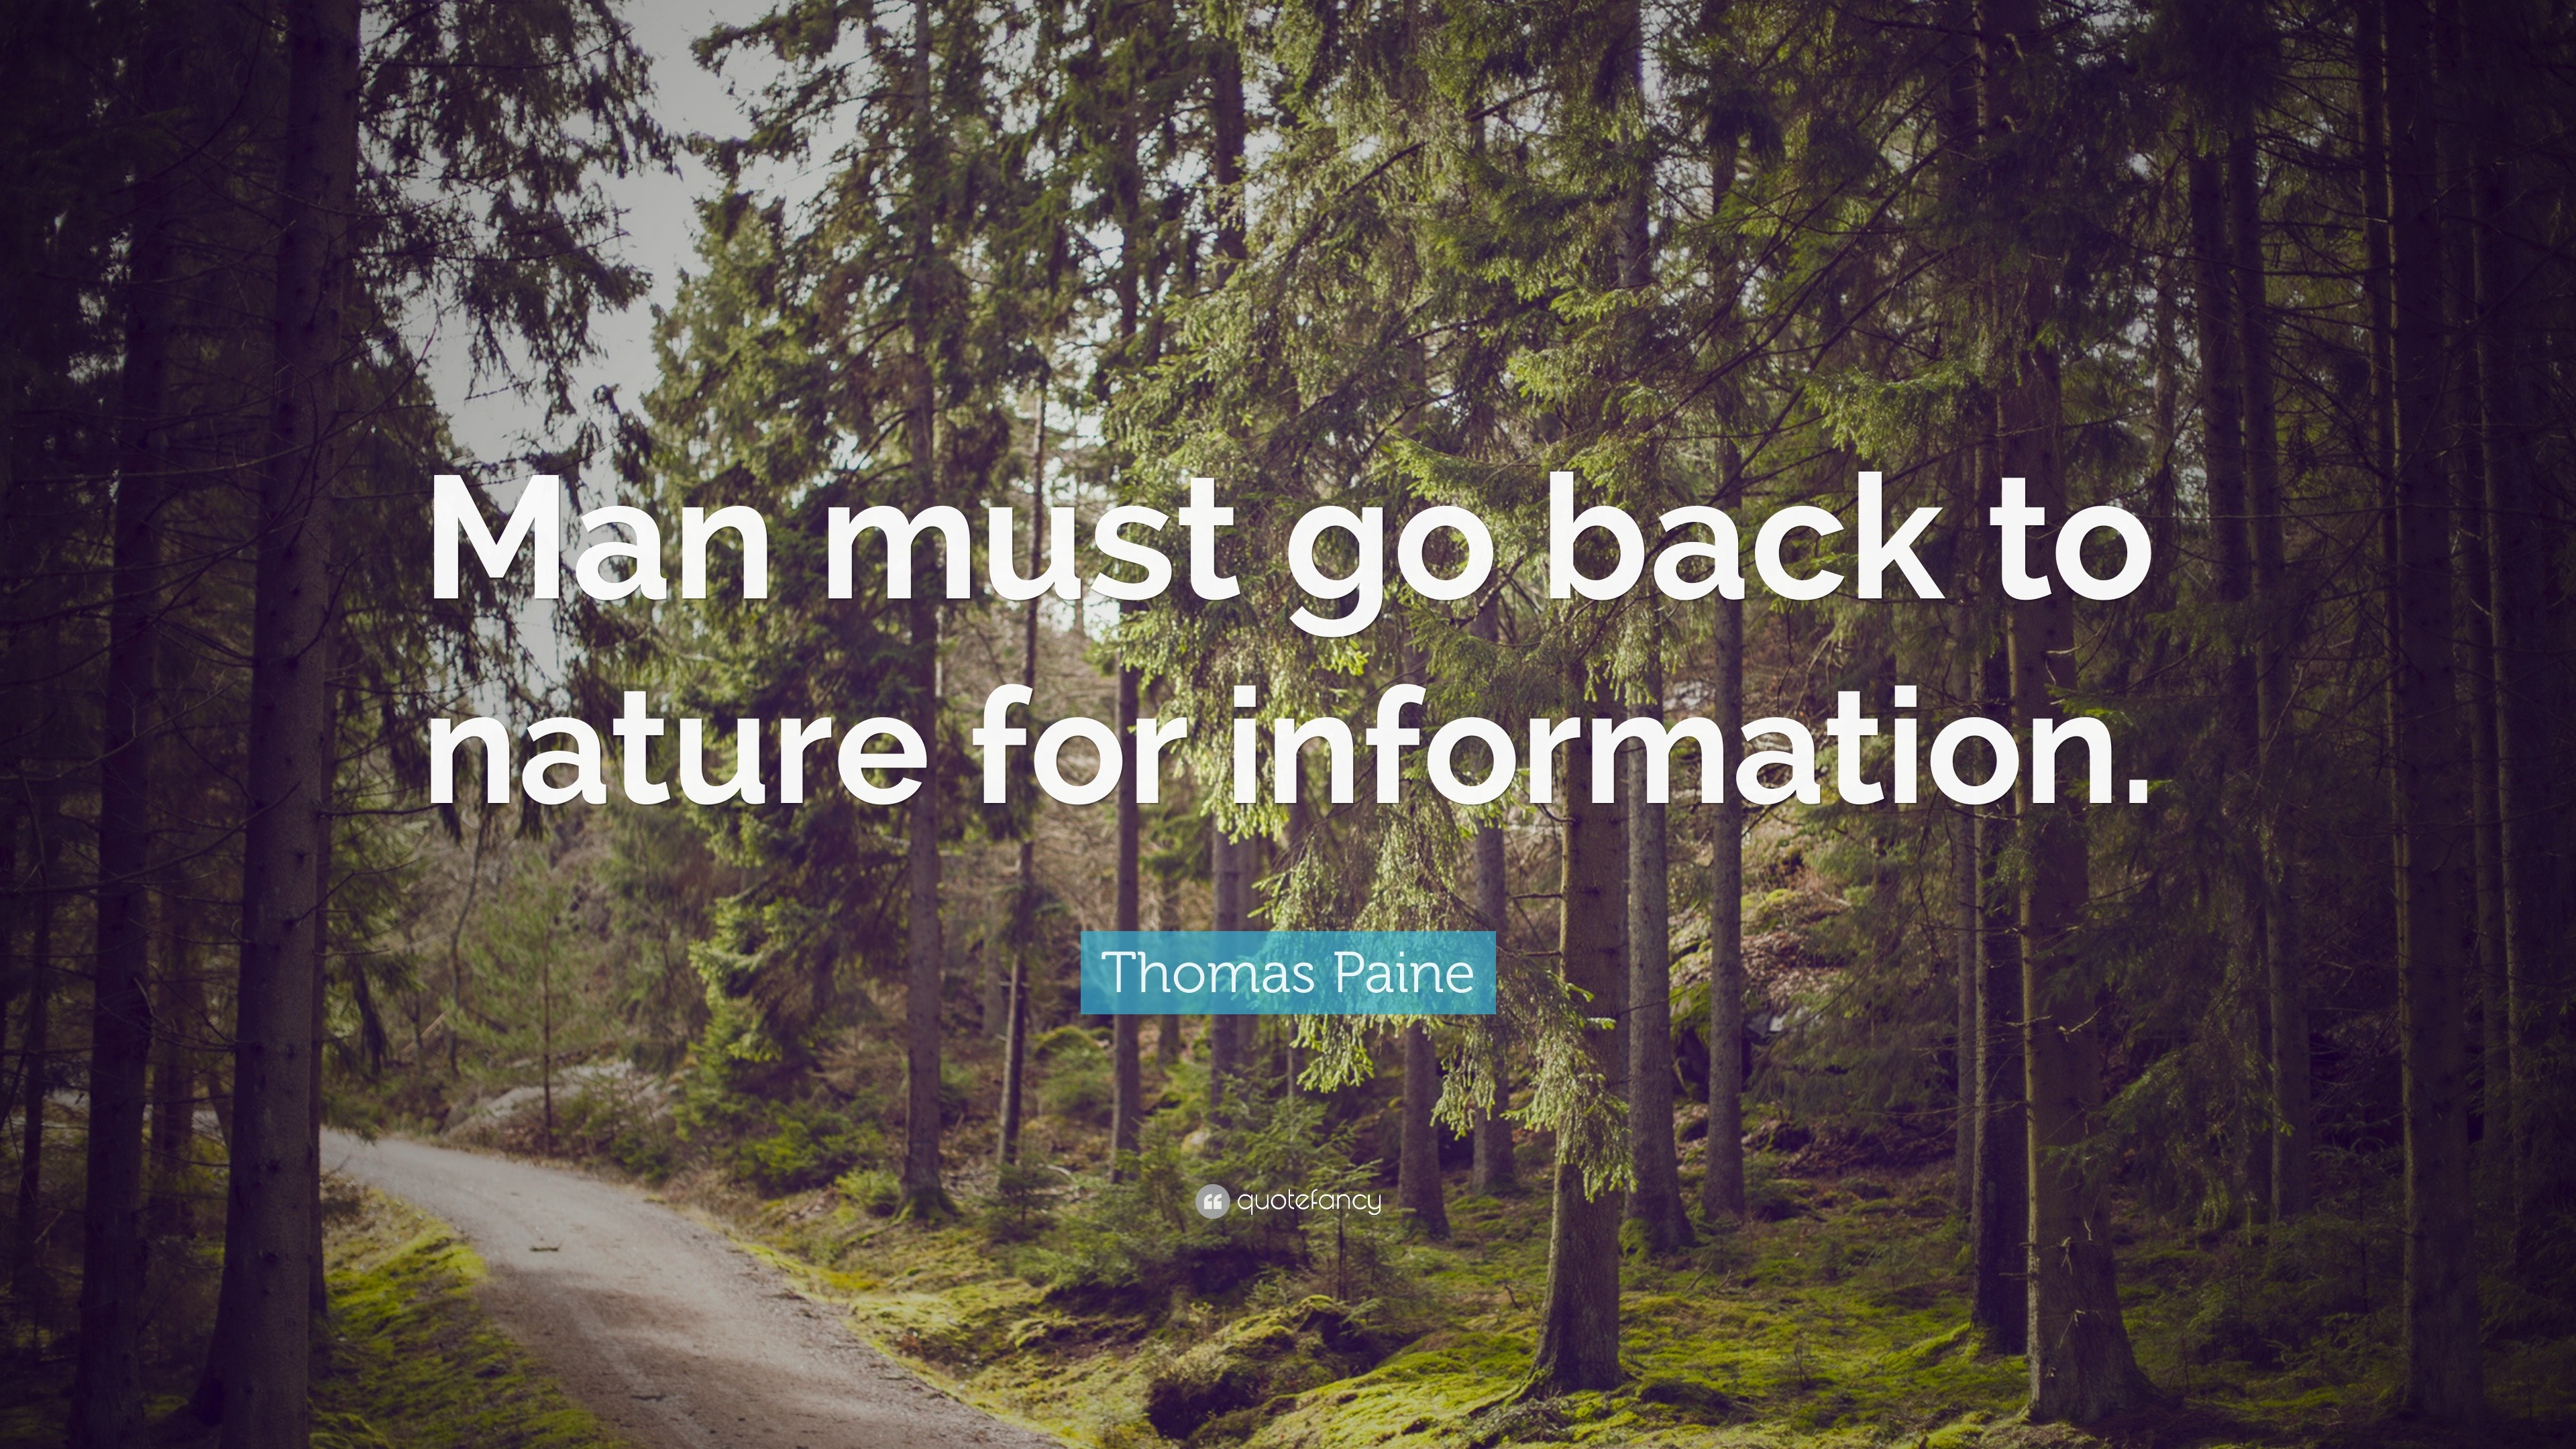 Thomas Paine Quote: “Man must go to for information.”